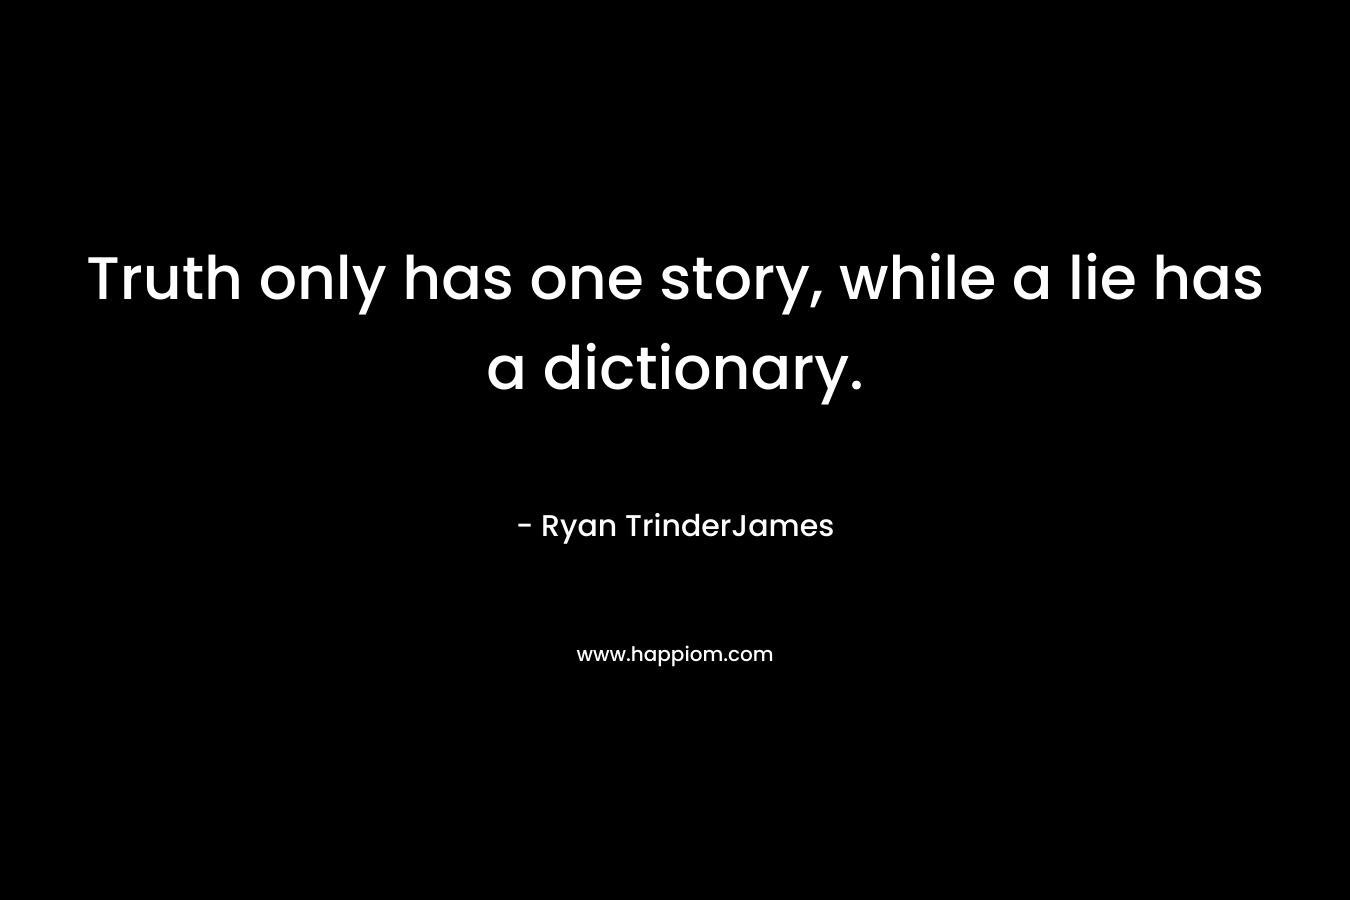 Truth only has one story, while a lie has a dictionary.